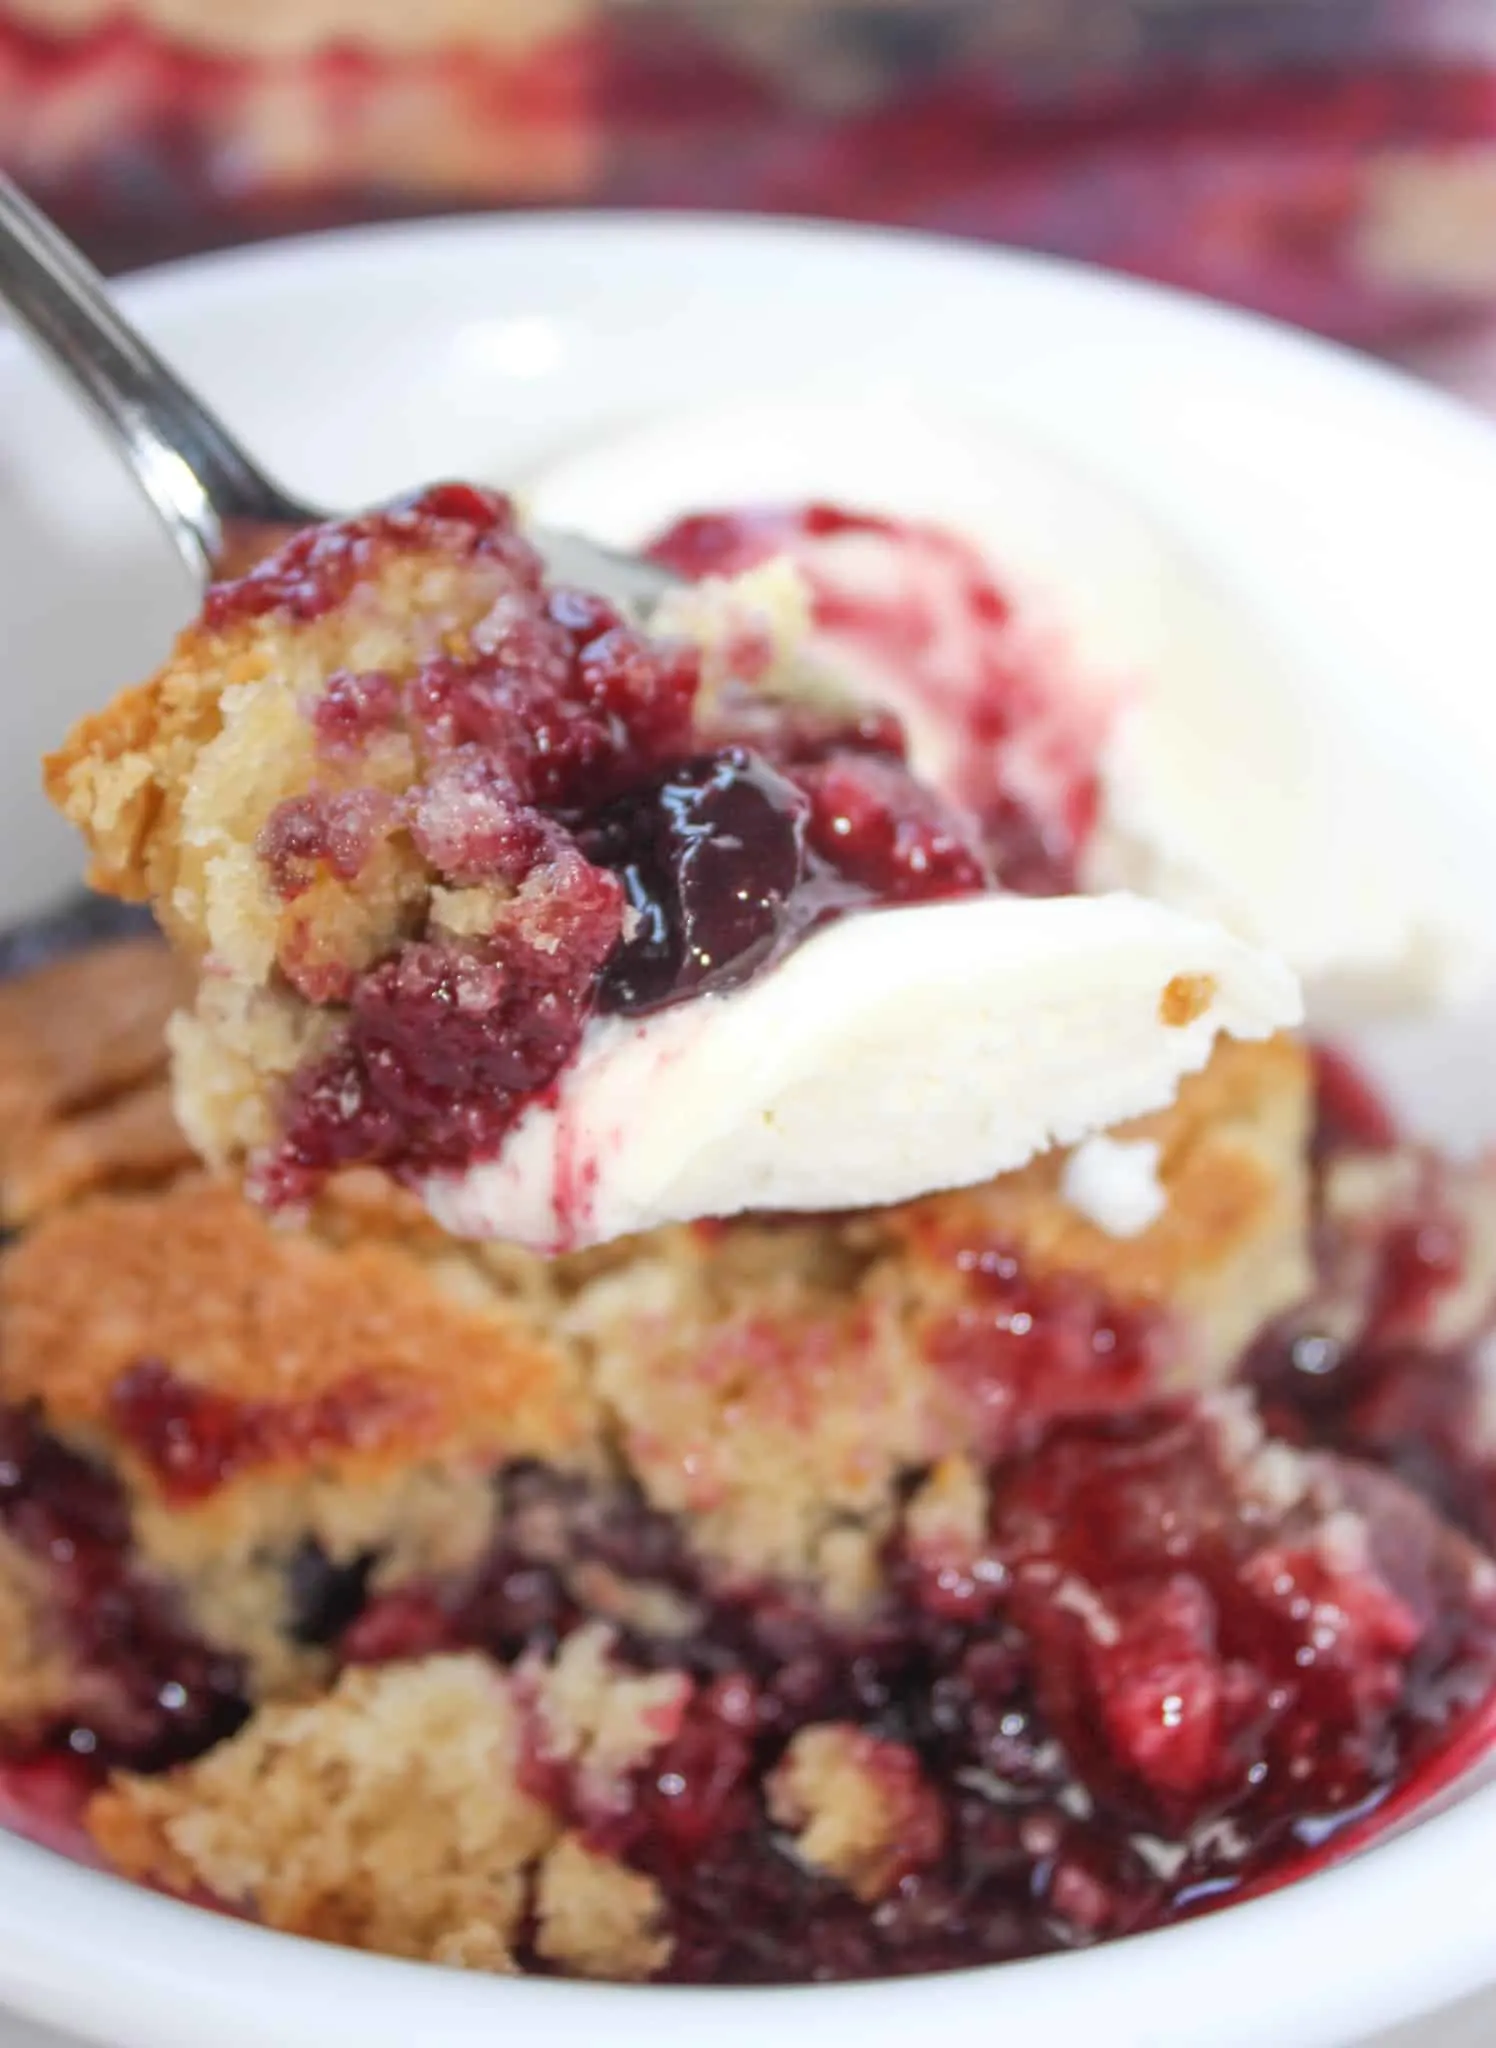 Jumbleberry Pudding is a delicious blend of seasonal fruits crowned with a cake like topping.  This gluten free pudding cake uses frozen berries and can be a fruity finish to a meal any time of the year.